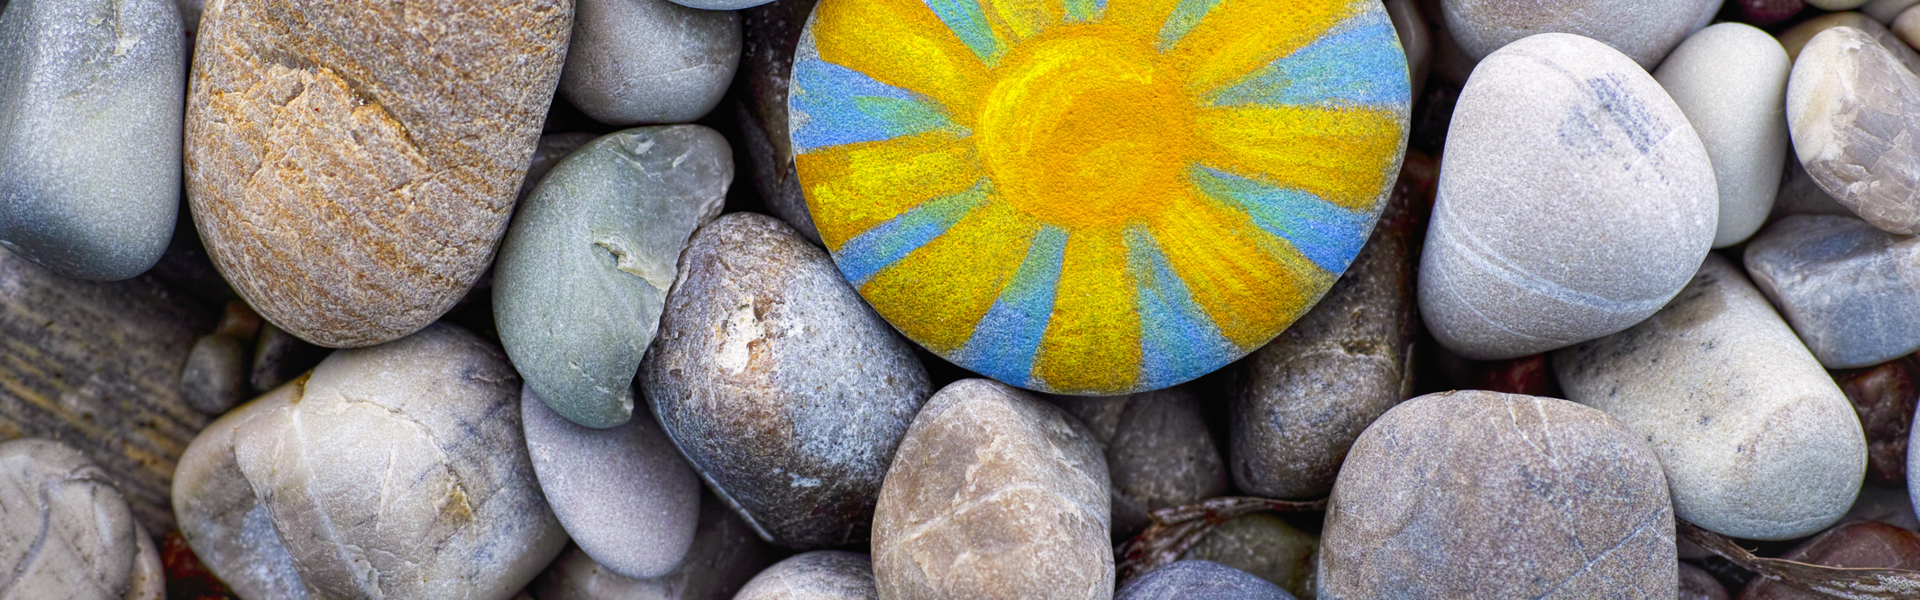 a close up of beach pebbles with one painted blue and yellow in the pattern of a sun